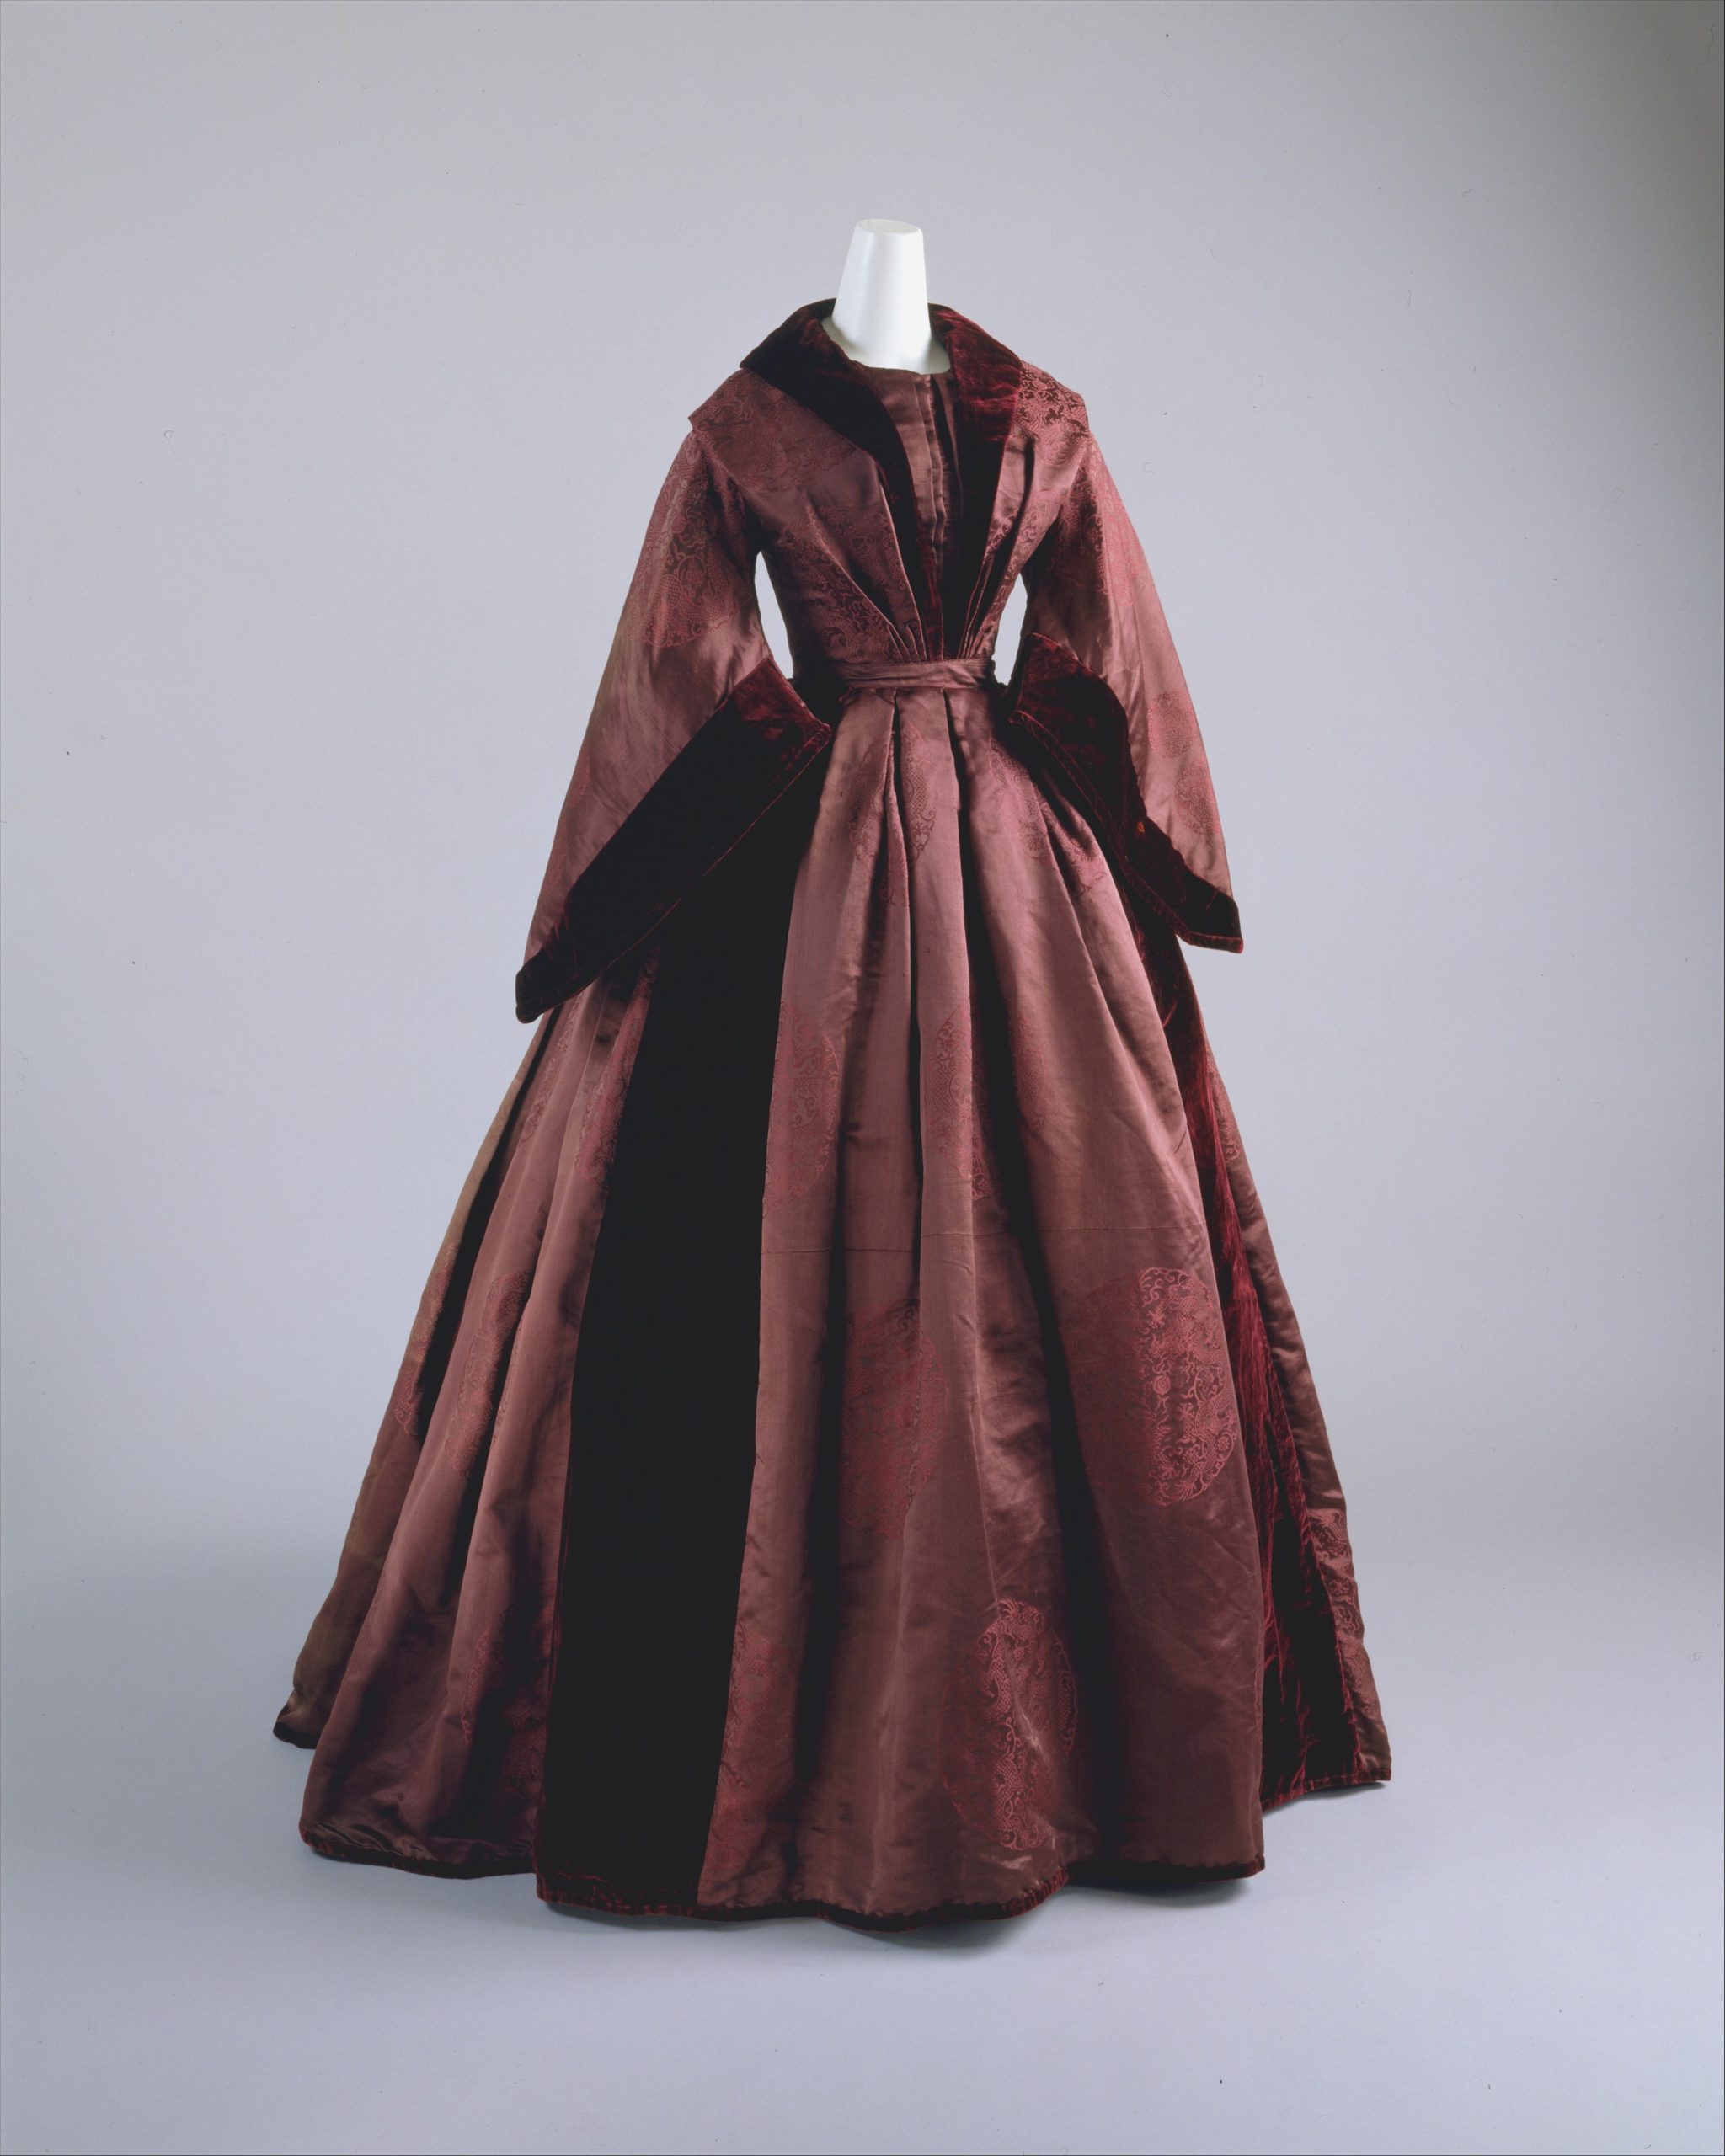 Image shows a dark purple-brown mid 19th century dress from the front